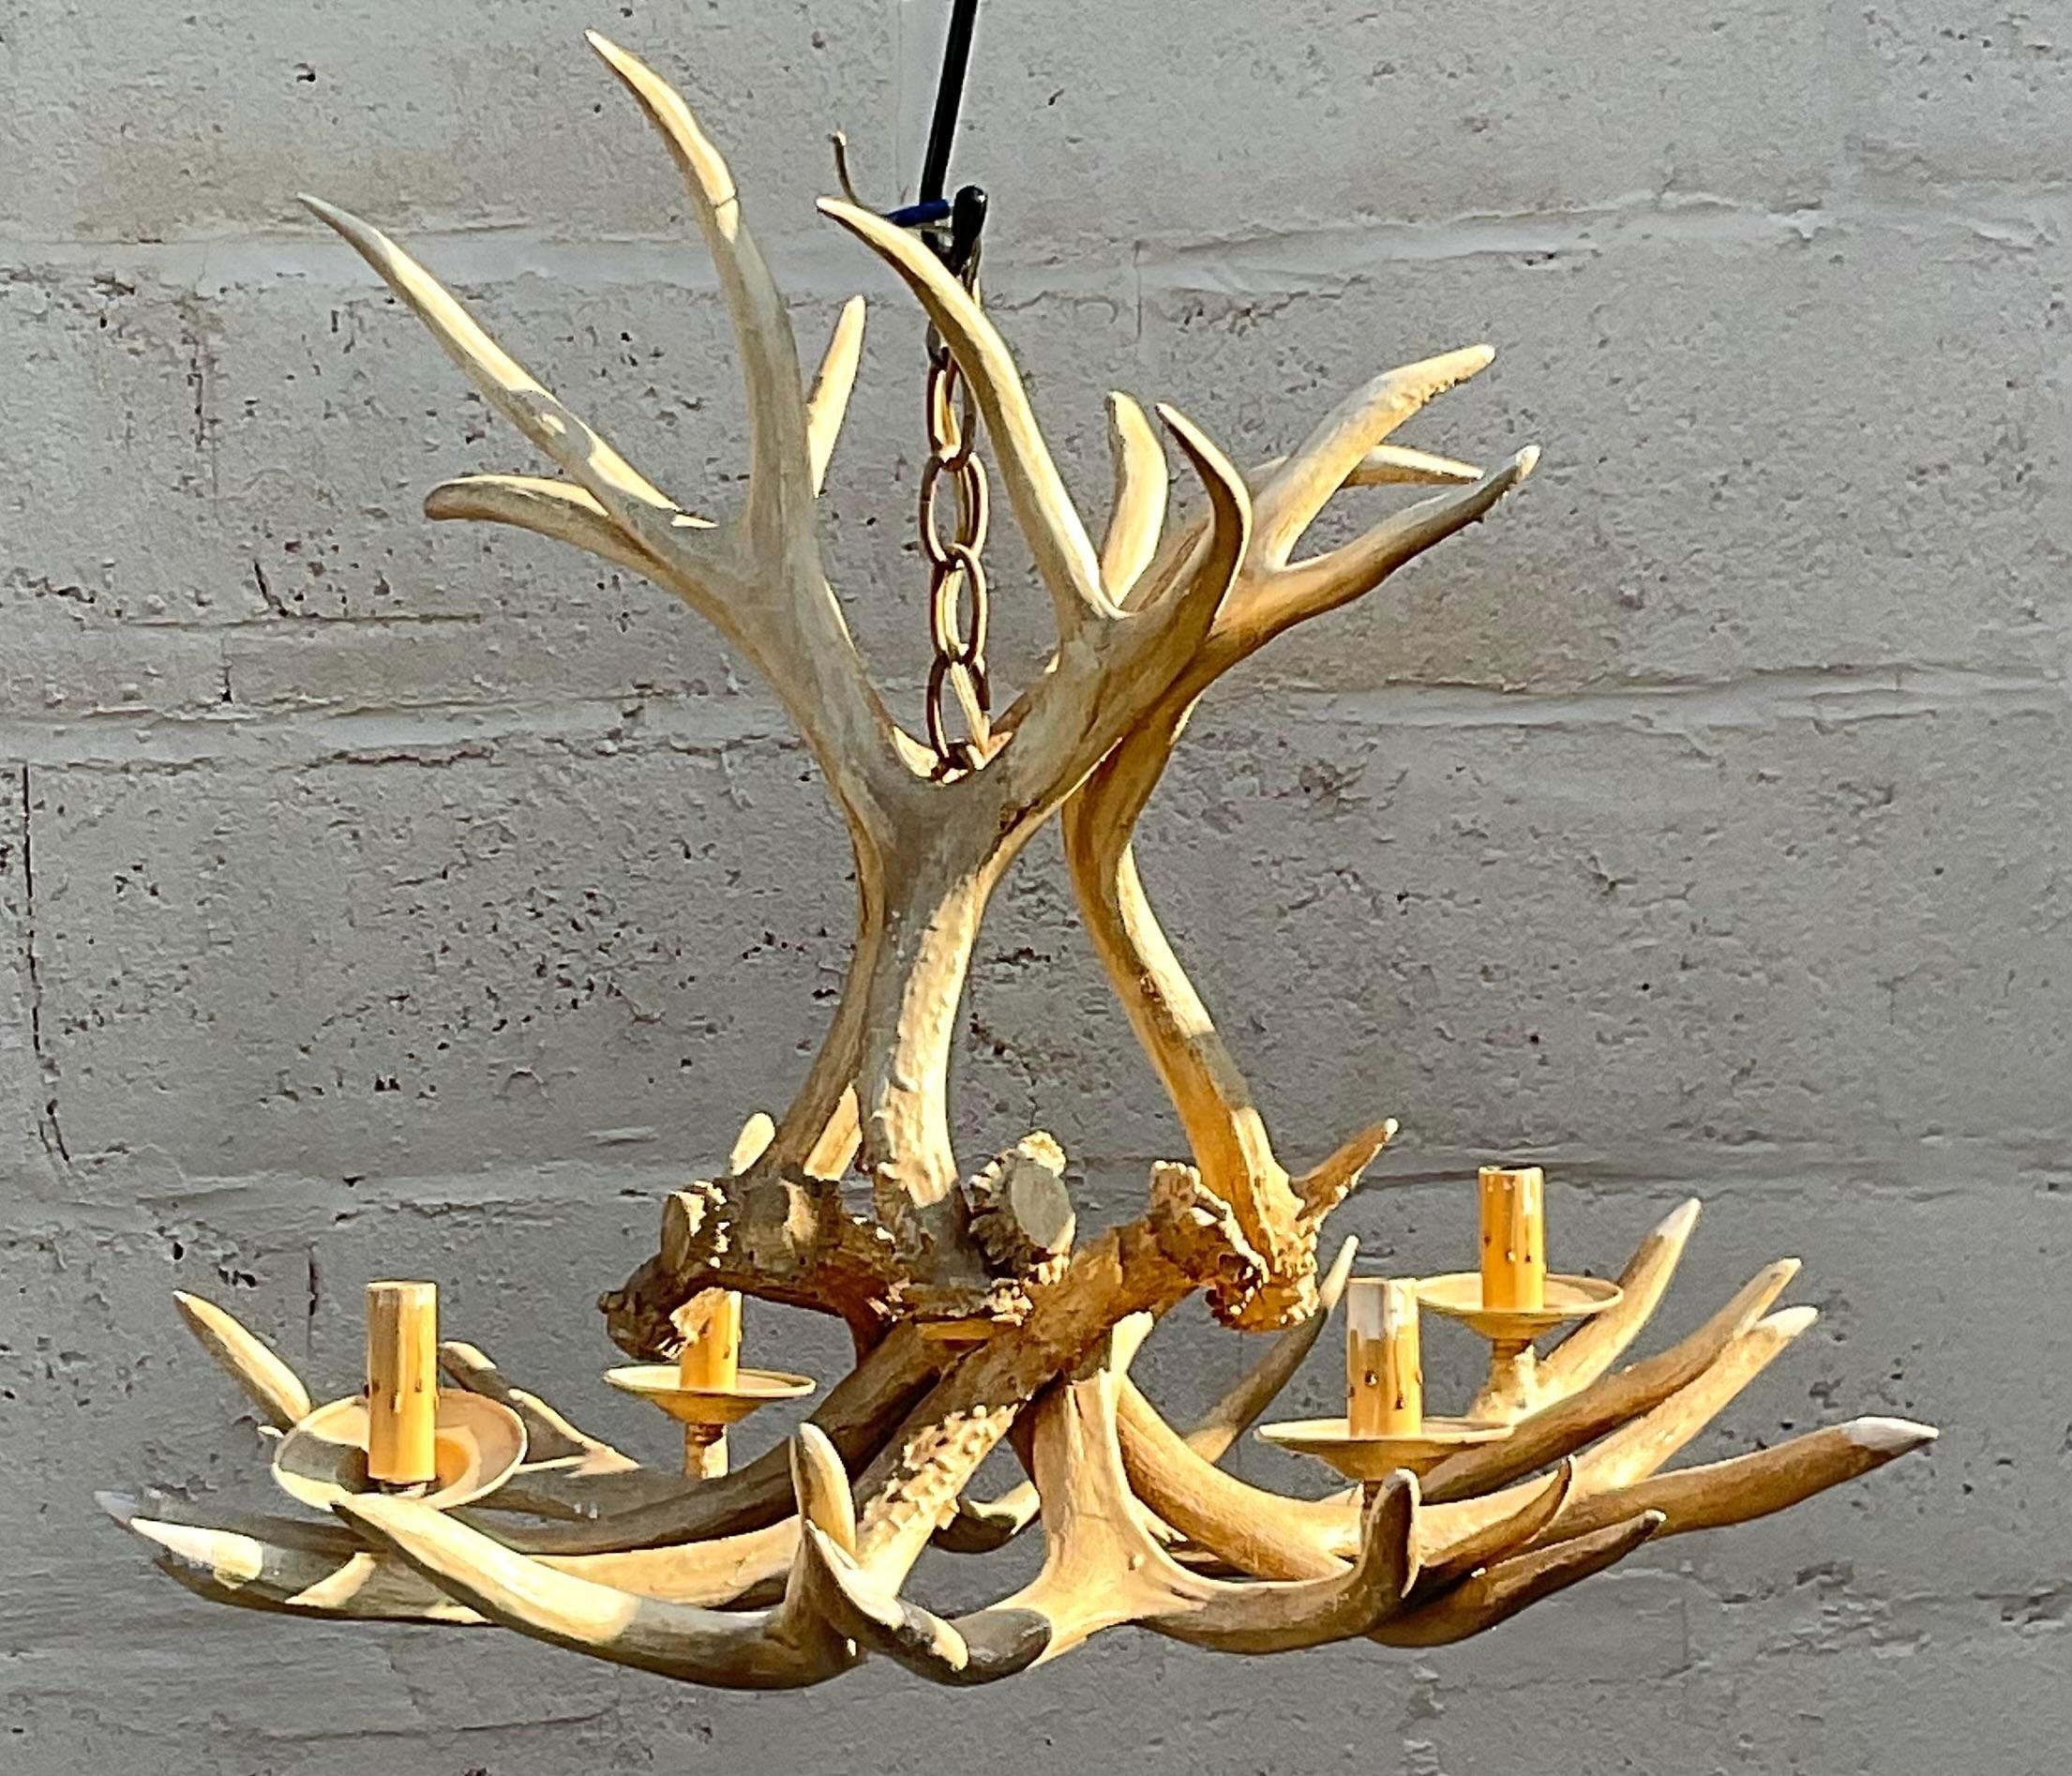 Elevate your decor with our Vintage Boho Faux Antler Chandelier. This unique piece combines rustic charm with Bohemian flair, featuring faux antlers for a touch of wilderness. A standout choice for adding a blend of American ruggedness and eclectic